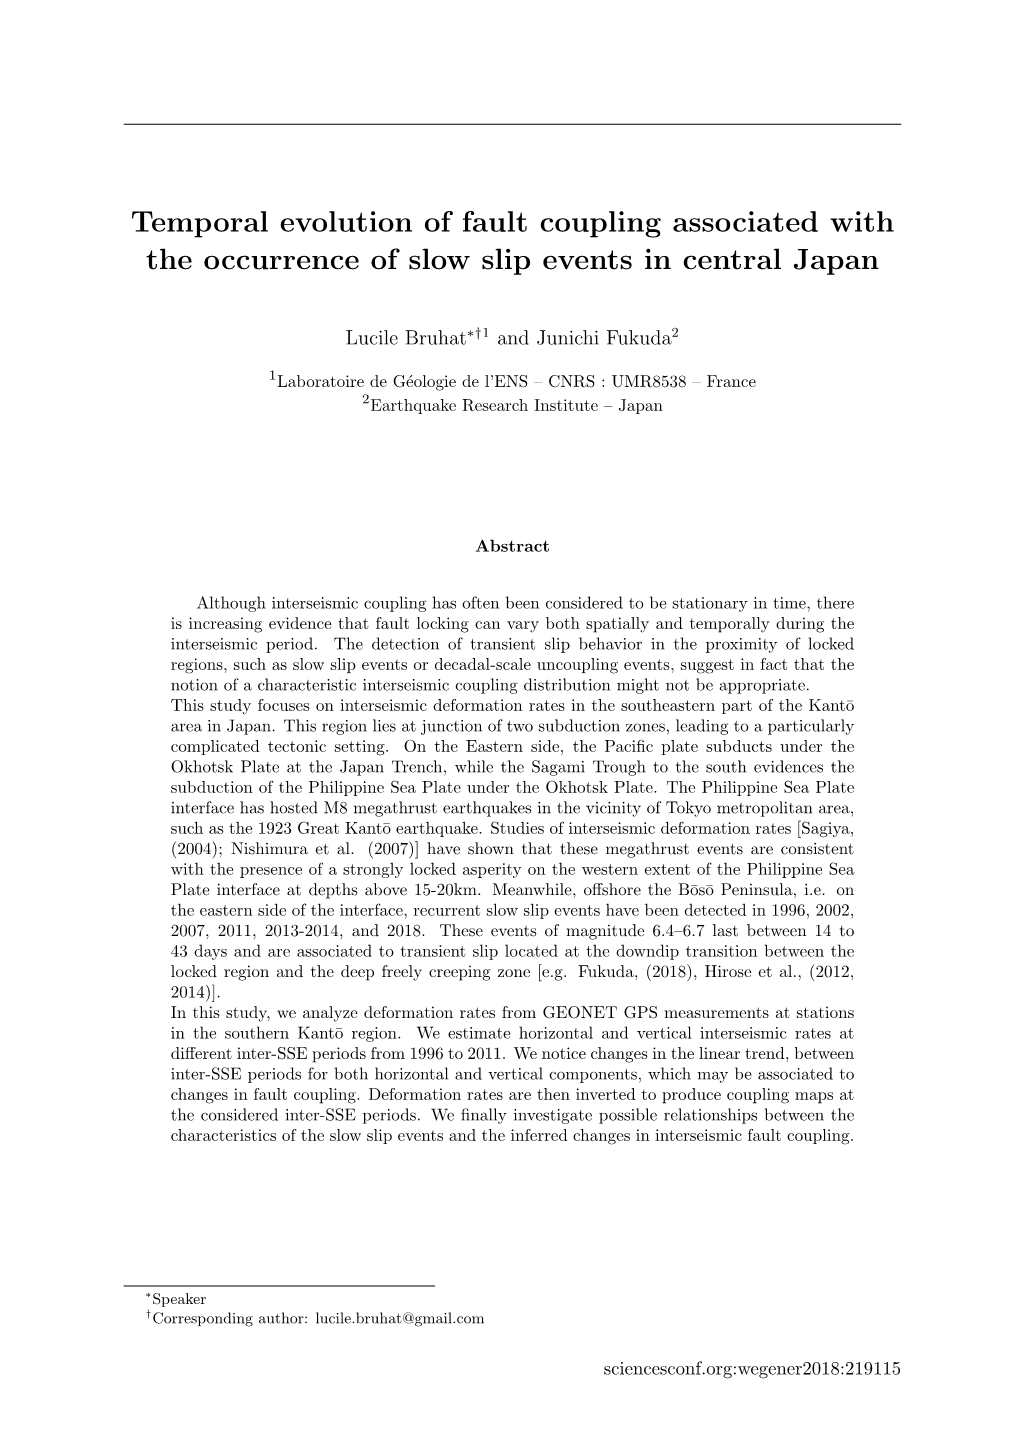 Temporal Evolution of Fault Coupling Associated with the Occurrence of Slow Slip Events in Central Japan